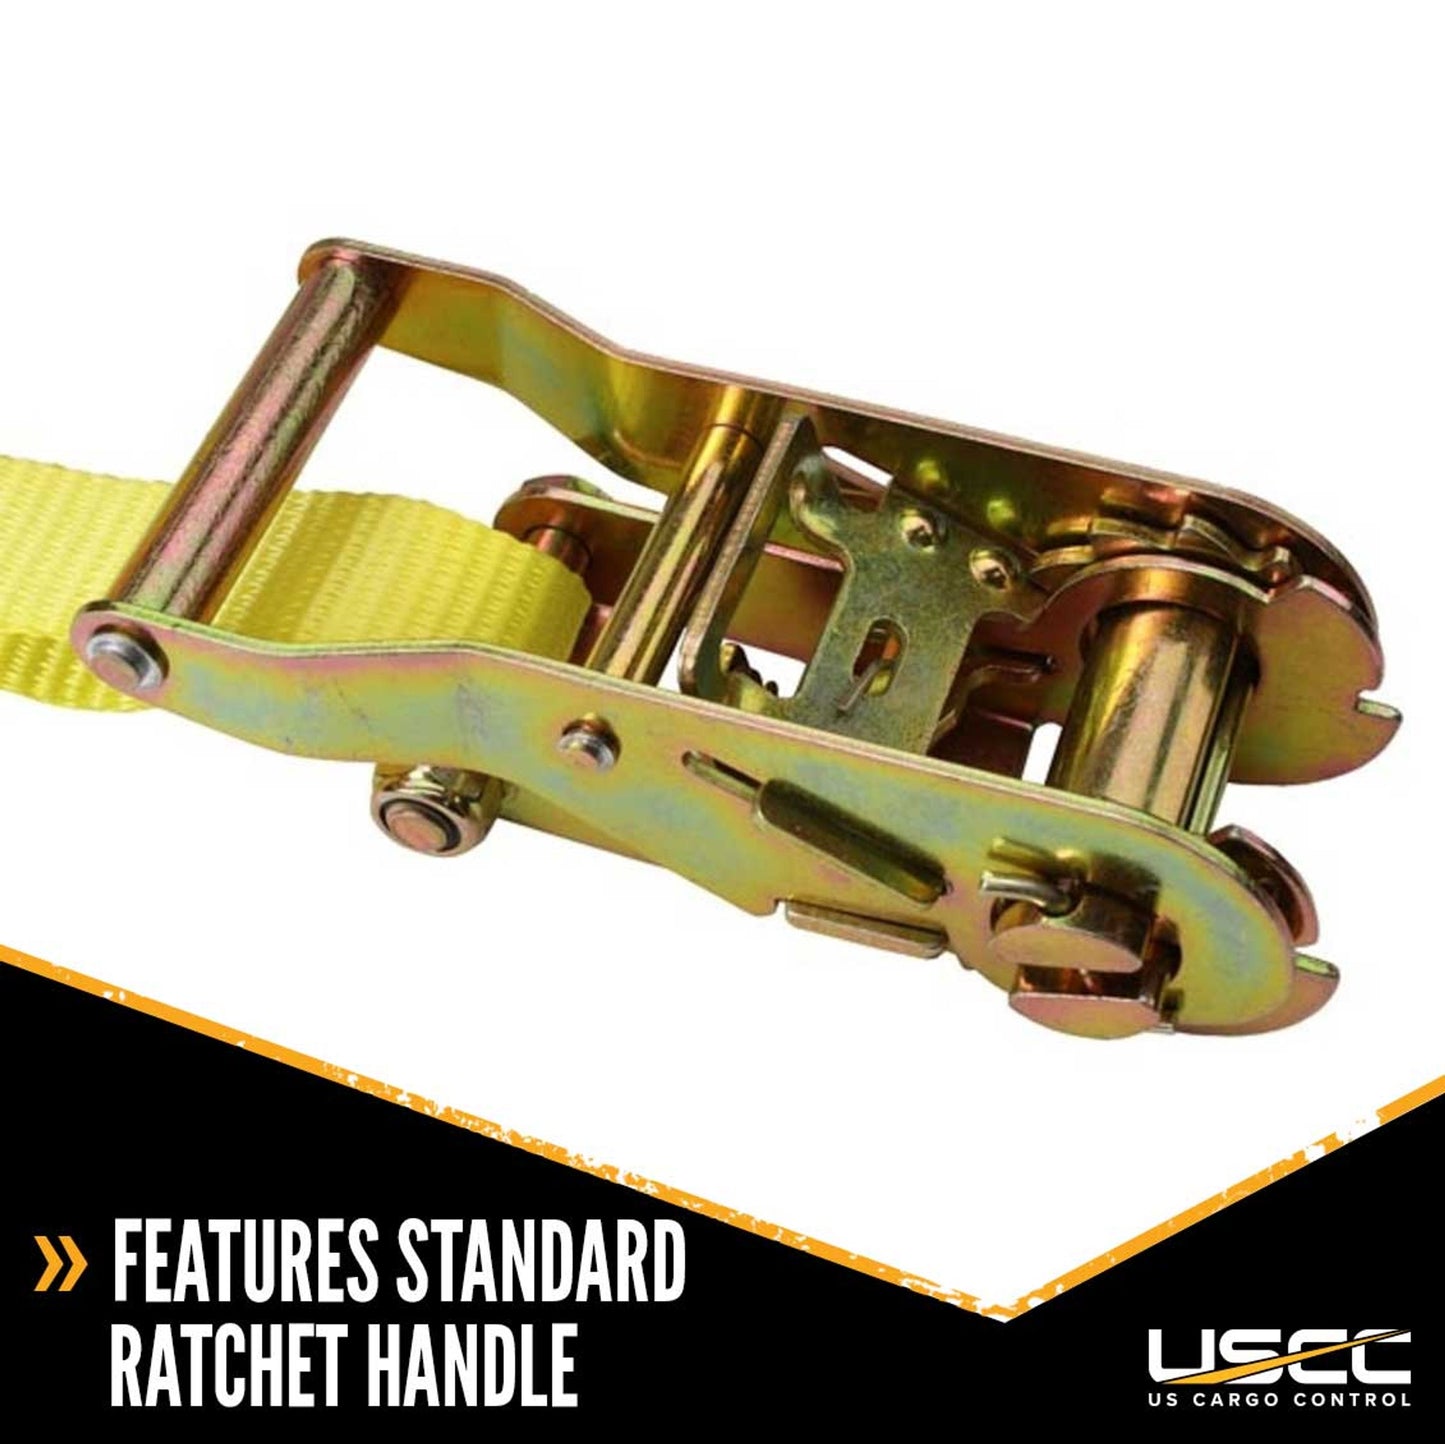 1" x 15' Ratchet Strap w/ S-Hook - 4 pack image 3 of 10